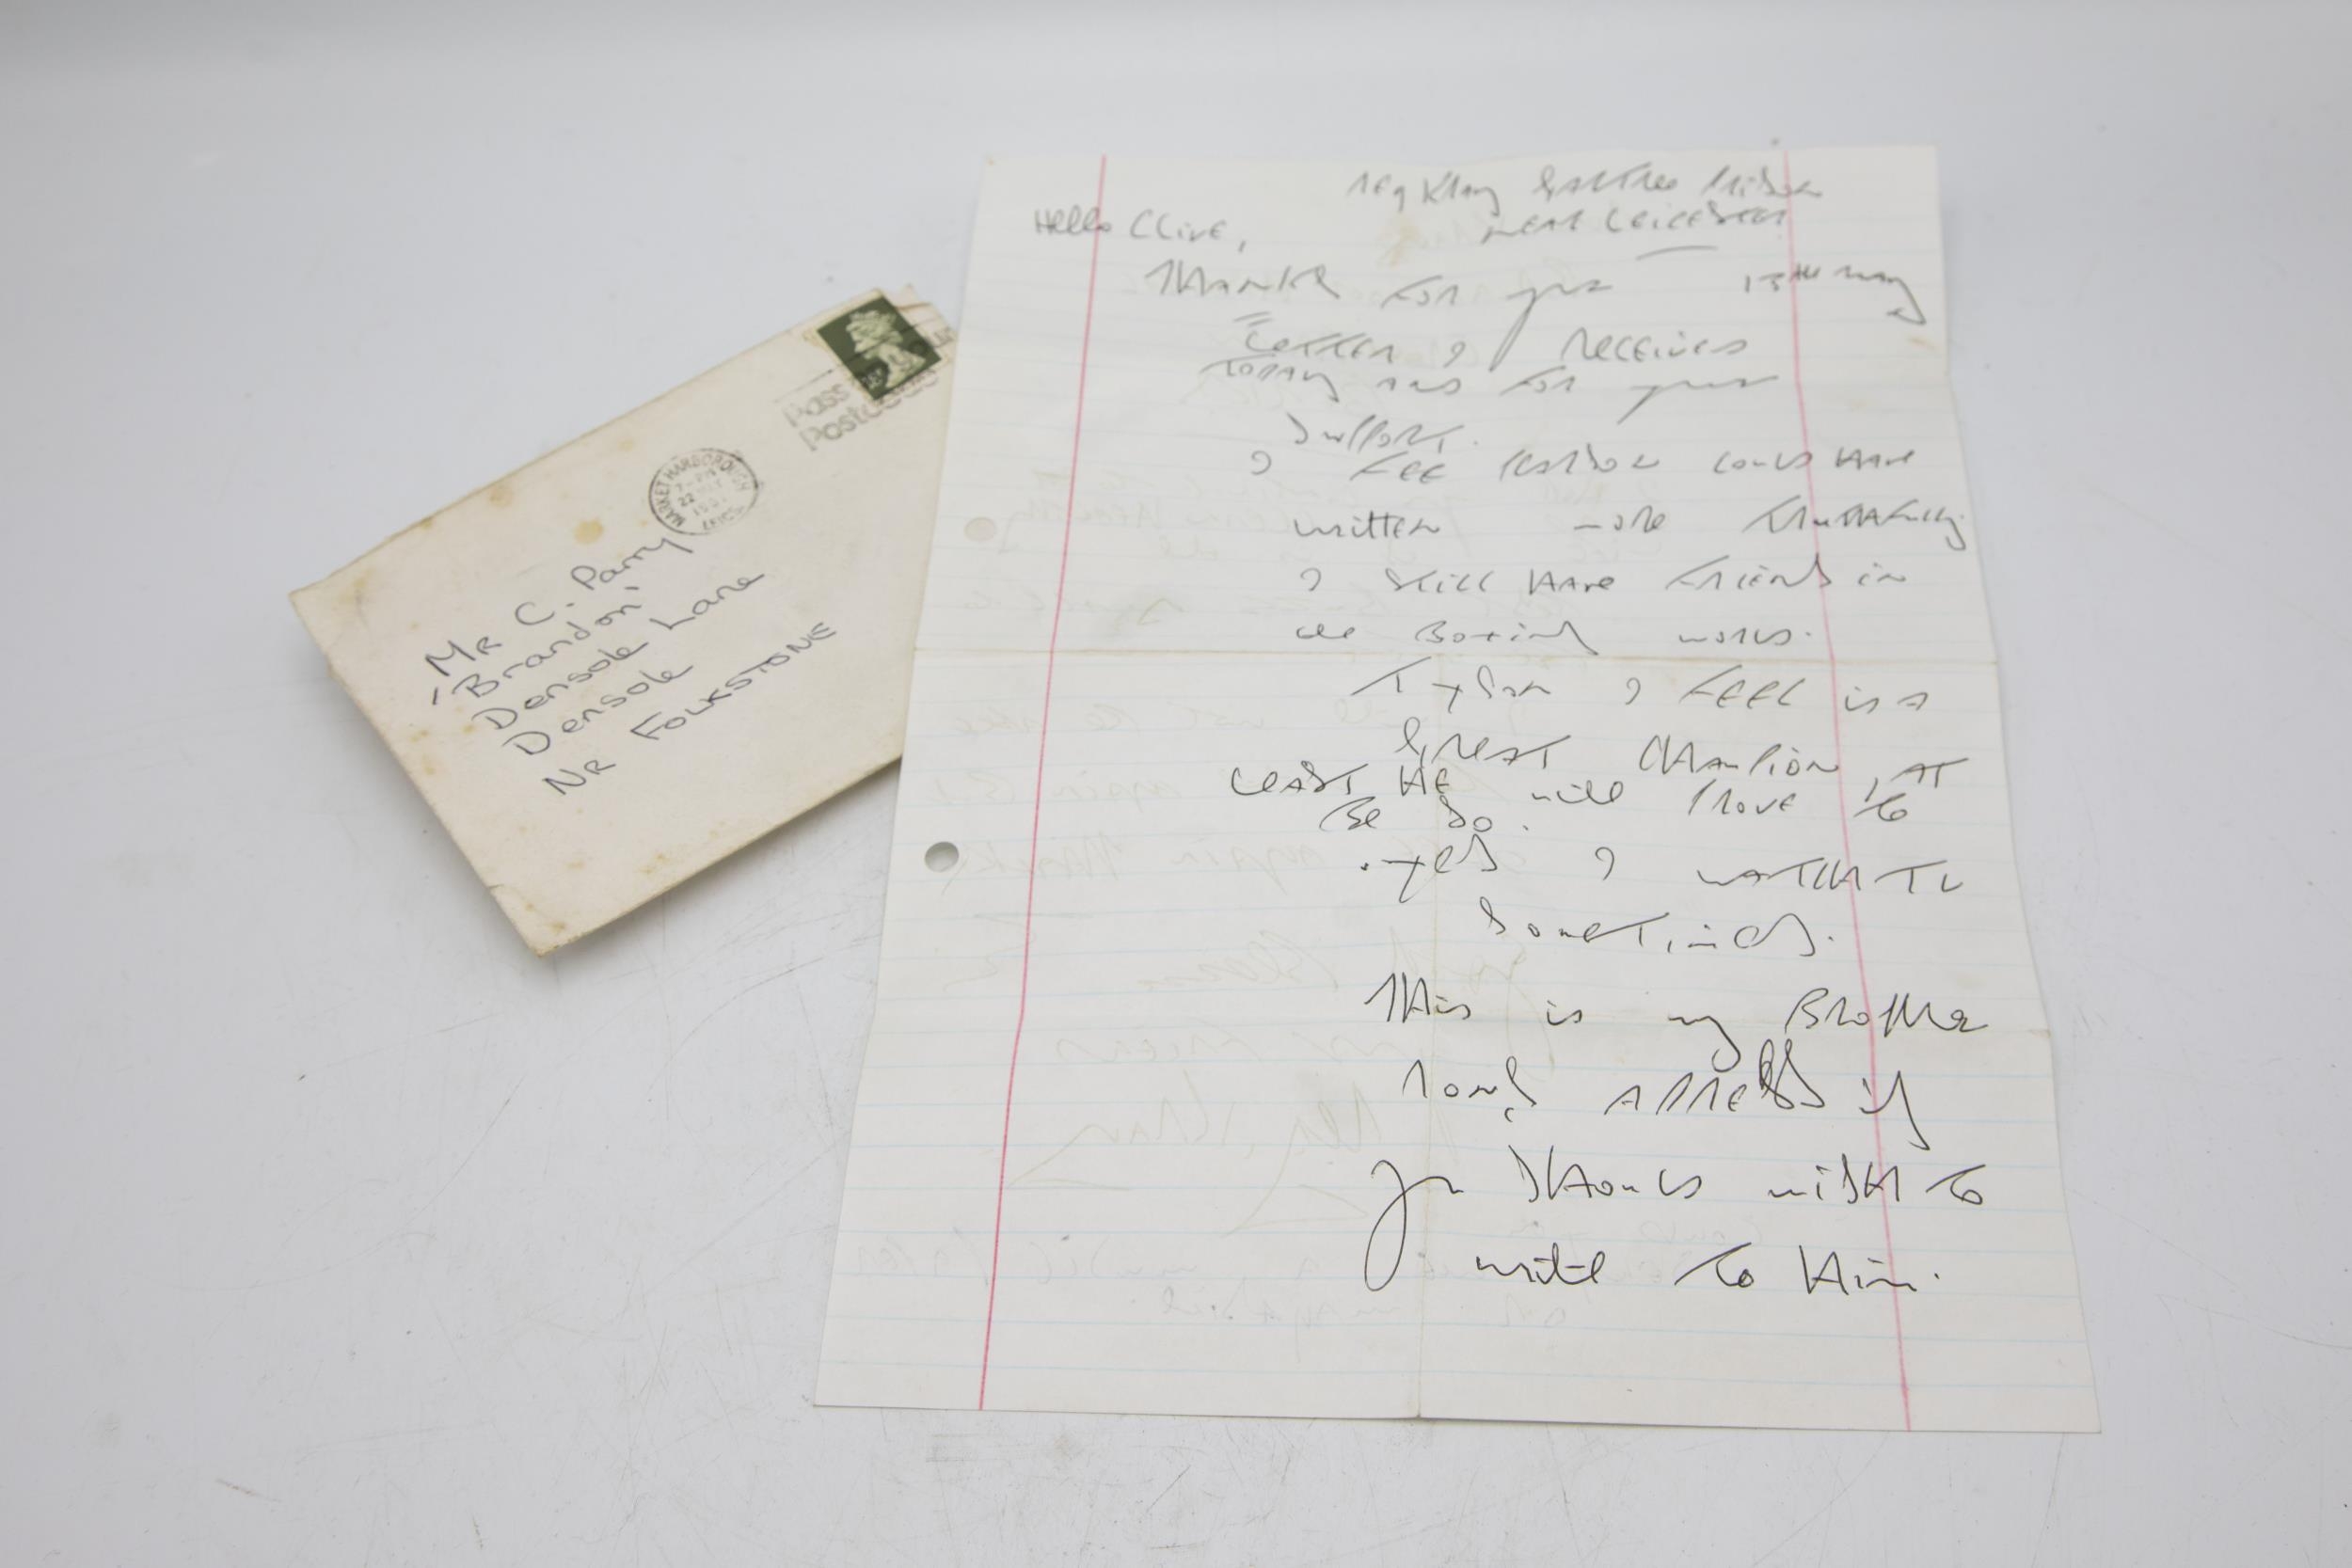 Incredibly rare letter written by Reggie Kray to Mr C Parry, regarding a young boxing prospect